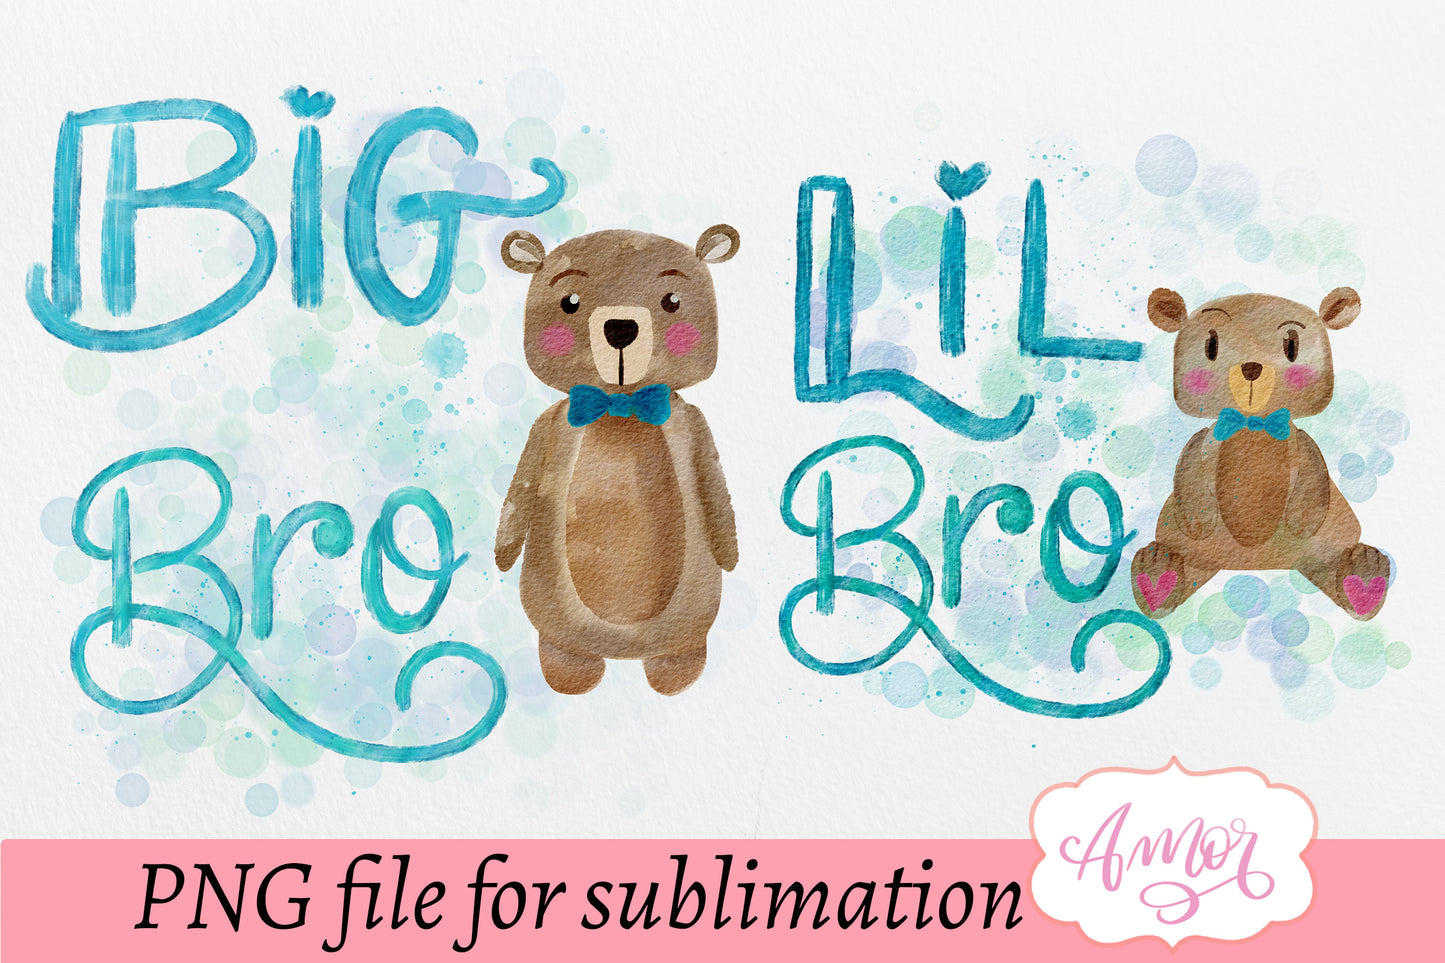 Little Brother Big Brother PNG files for sublimation